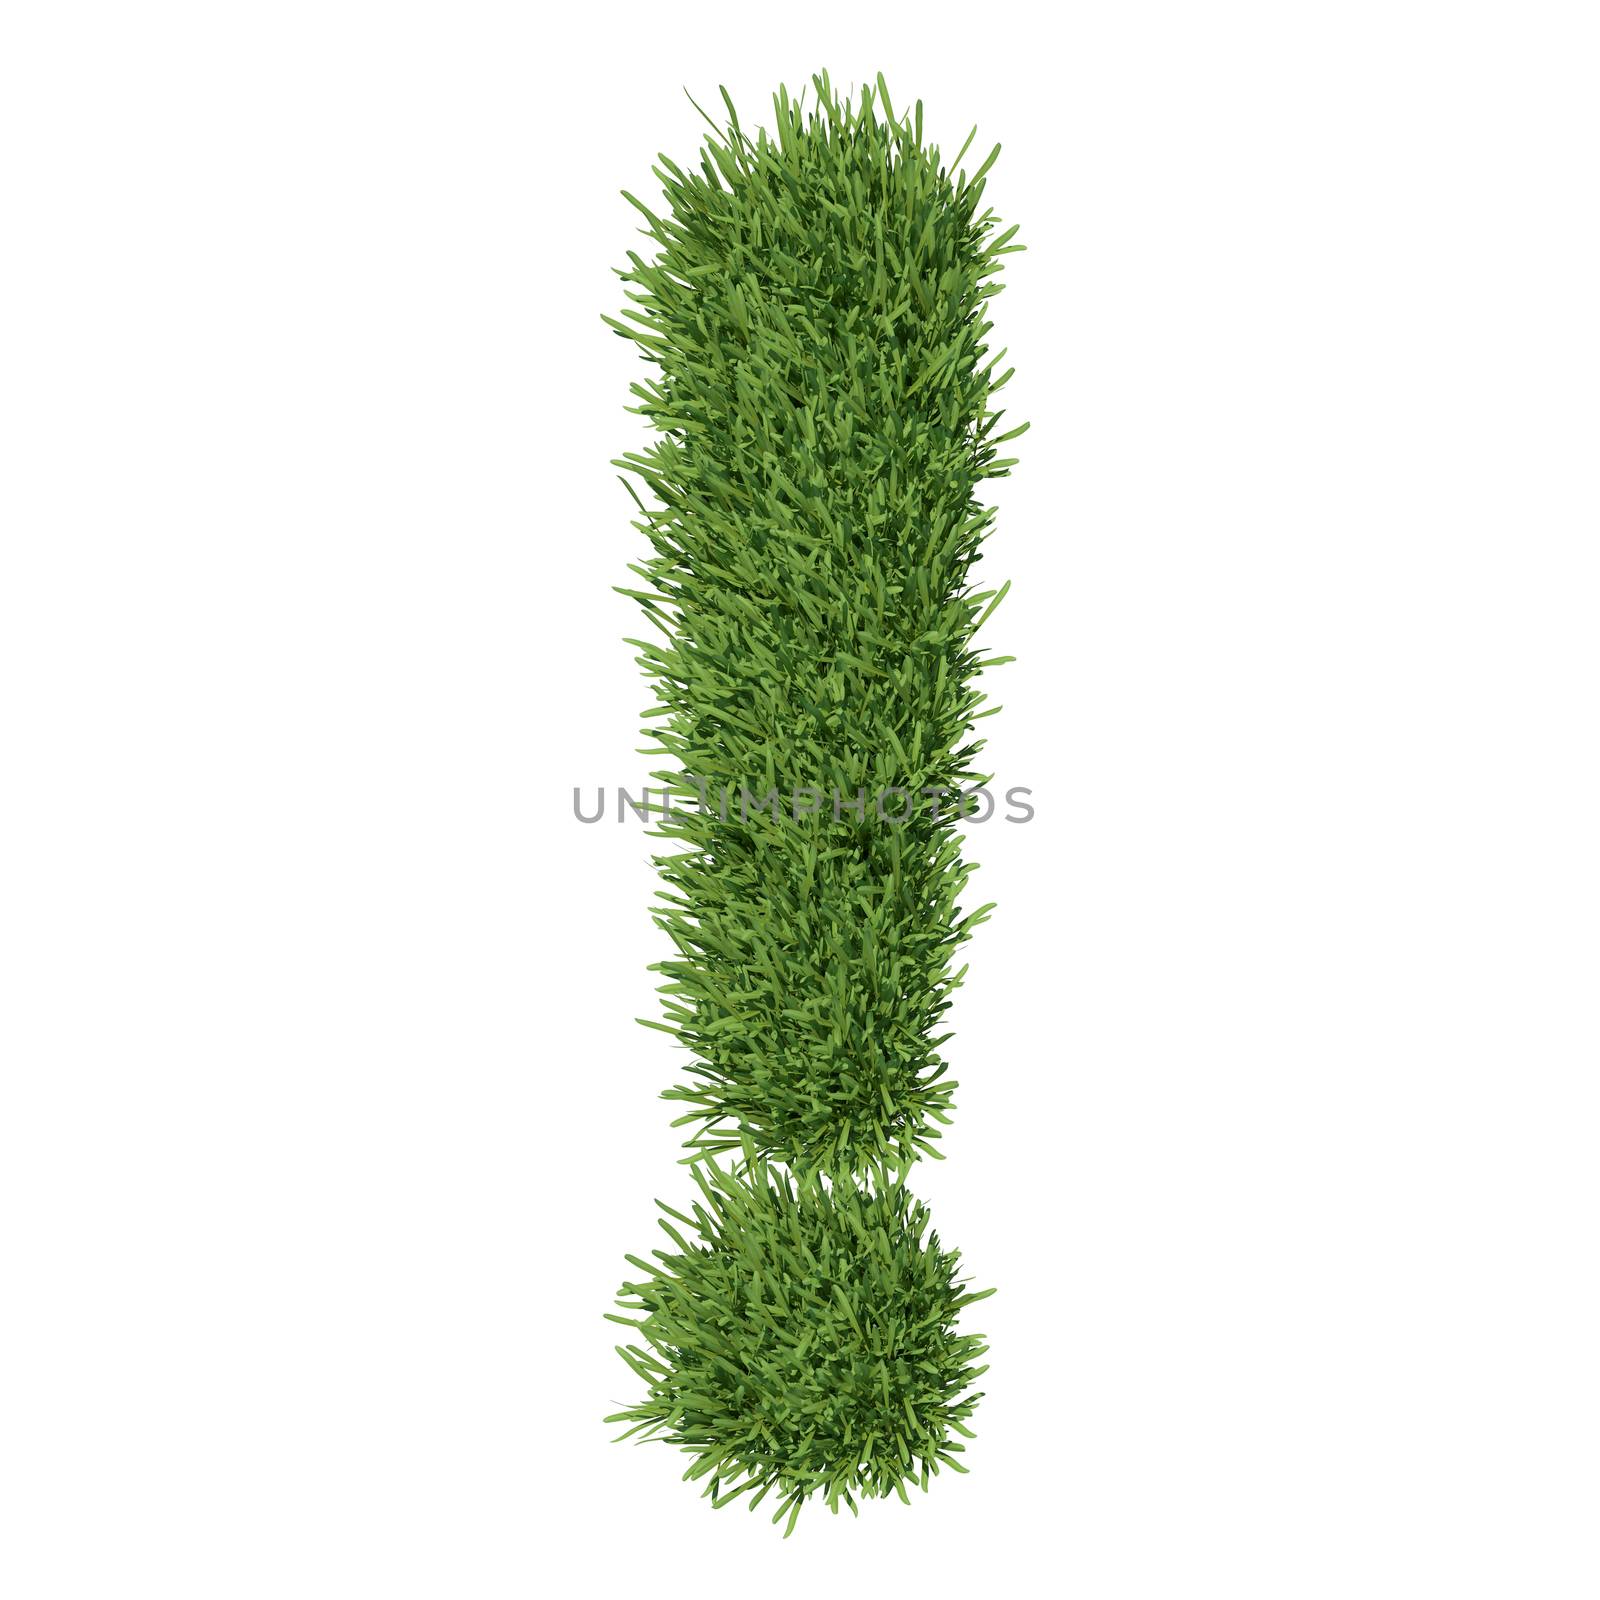 Exclamation mark made ​​of grass by cherezoff